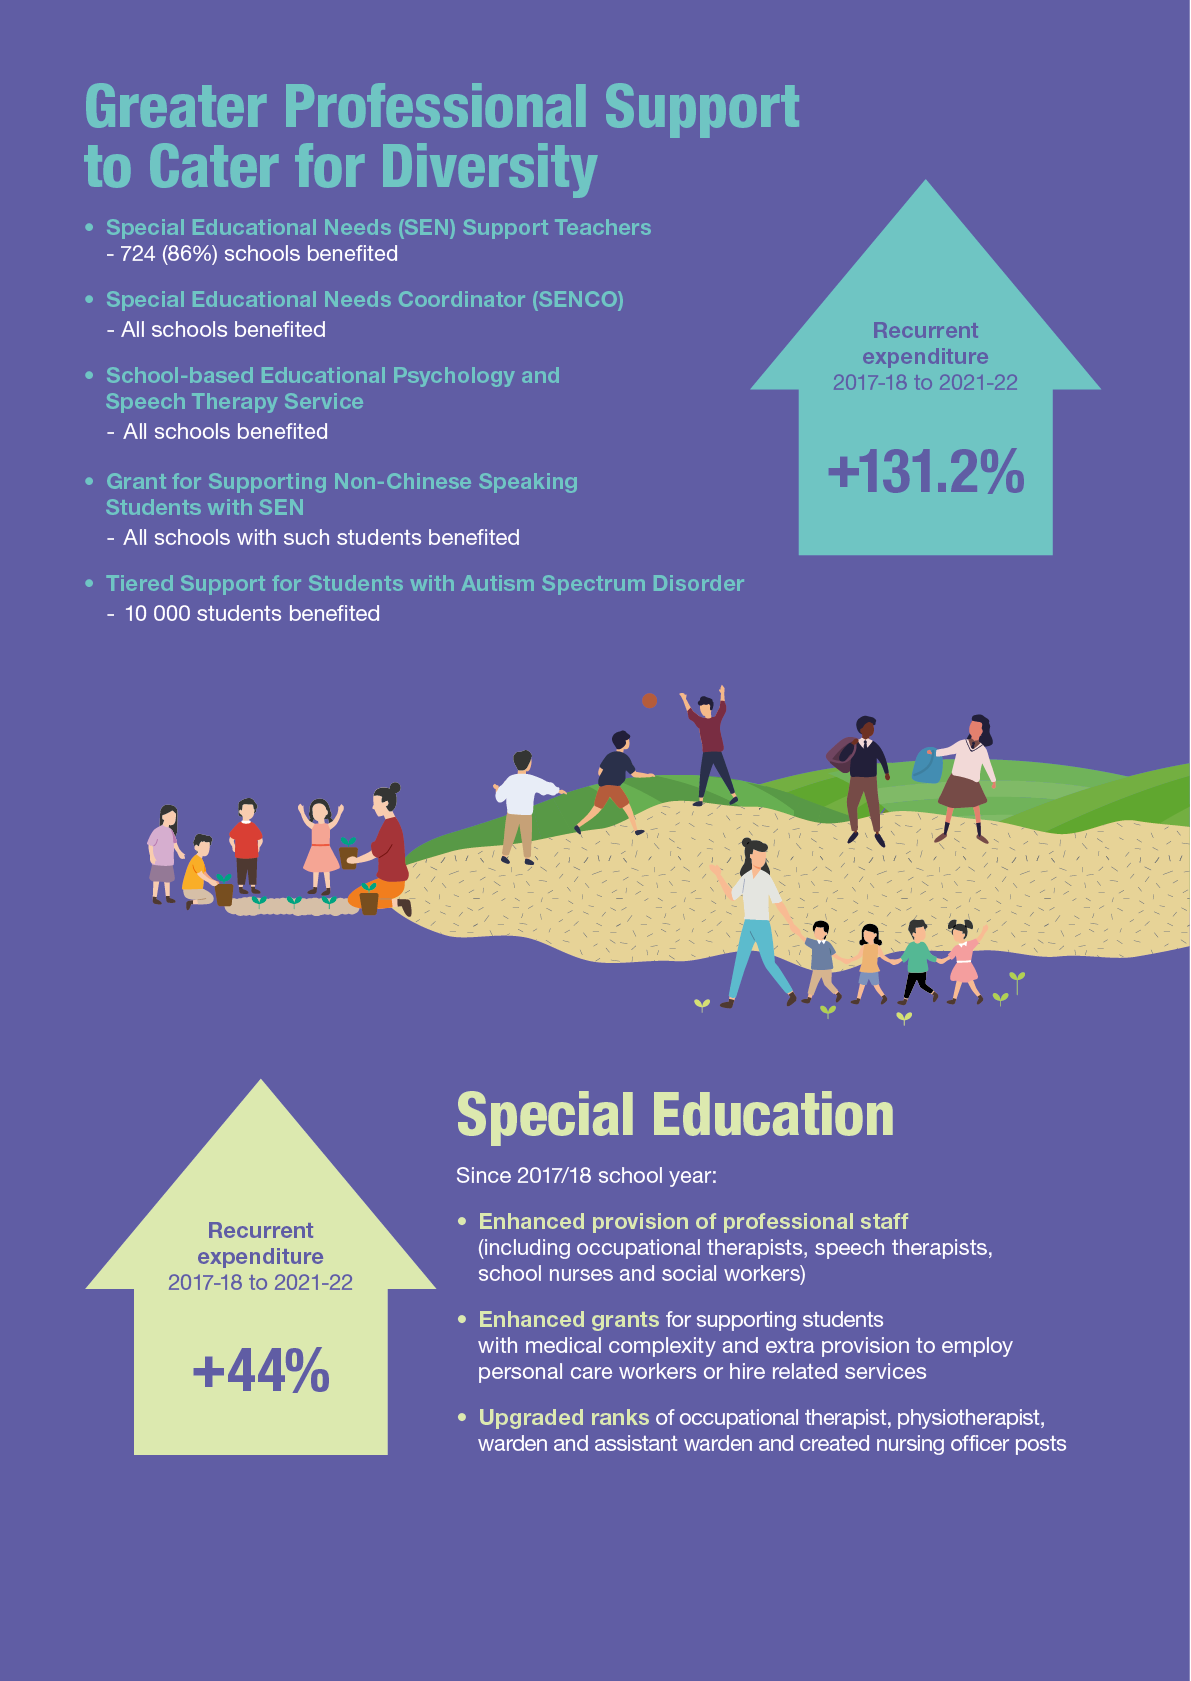 Greater Professional Support to Cater for Diversity and Special Education